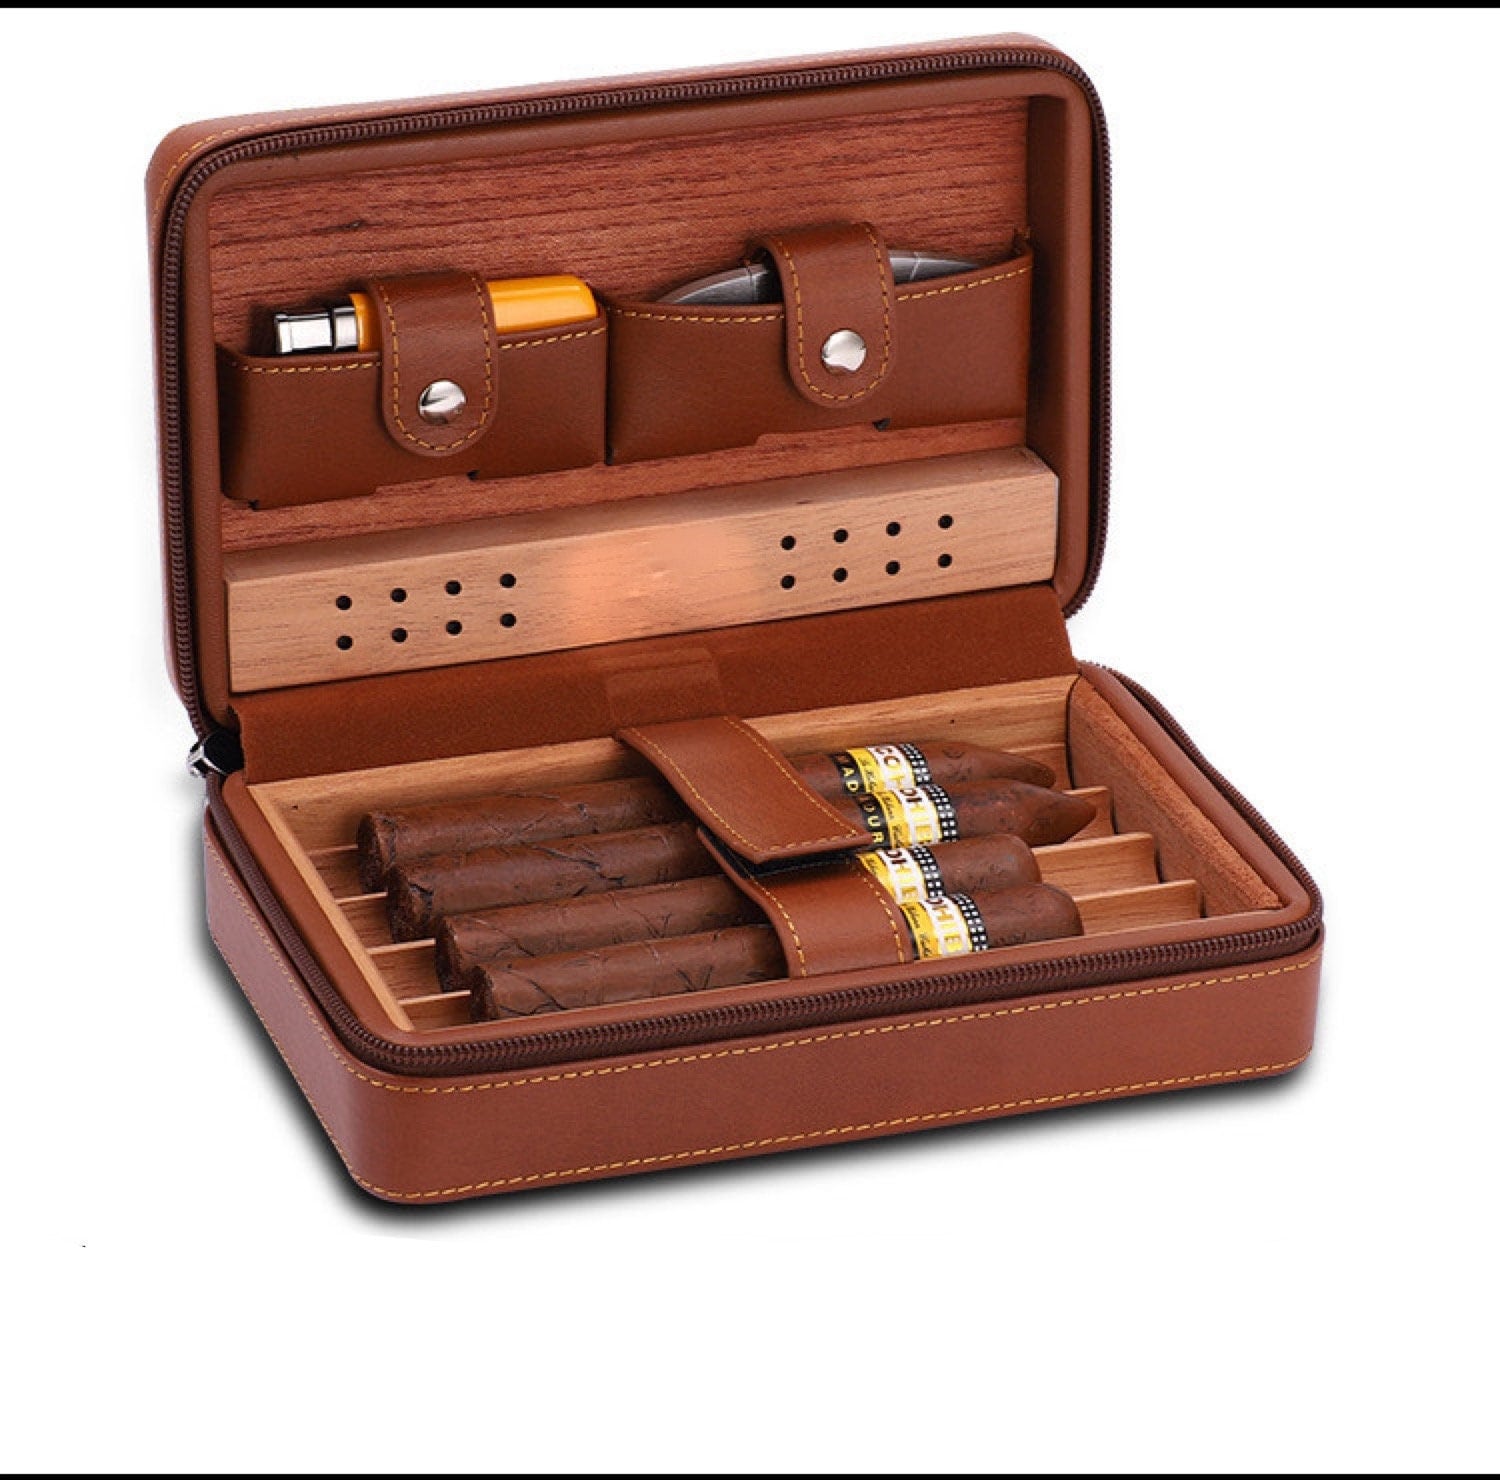 CHFG Leather Cigar Cases Cedar Wood Travel Humiodor Portable Cigars Box  with Cigar Lighter Accessories Set Holds 4 Cigars,Gifts for Men (Brown)